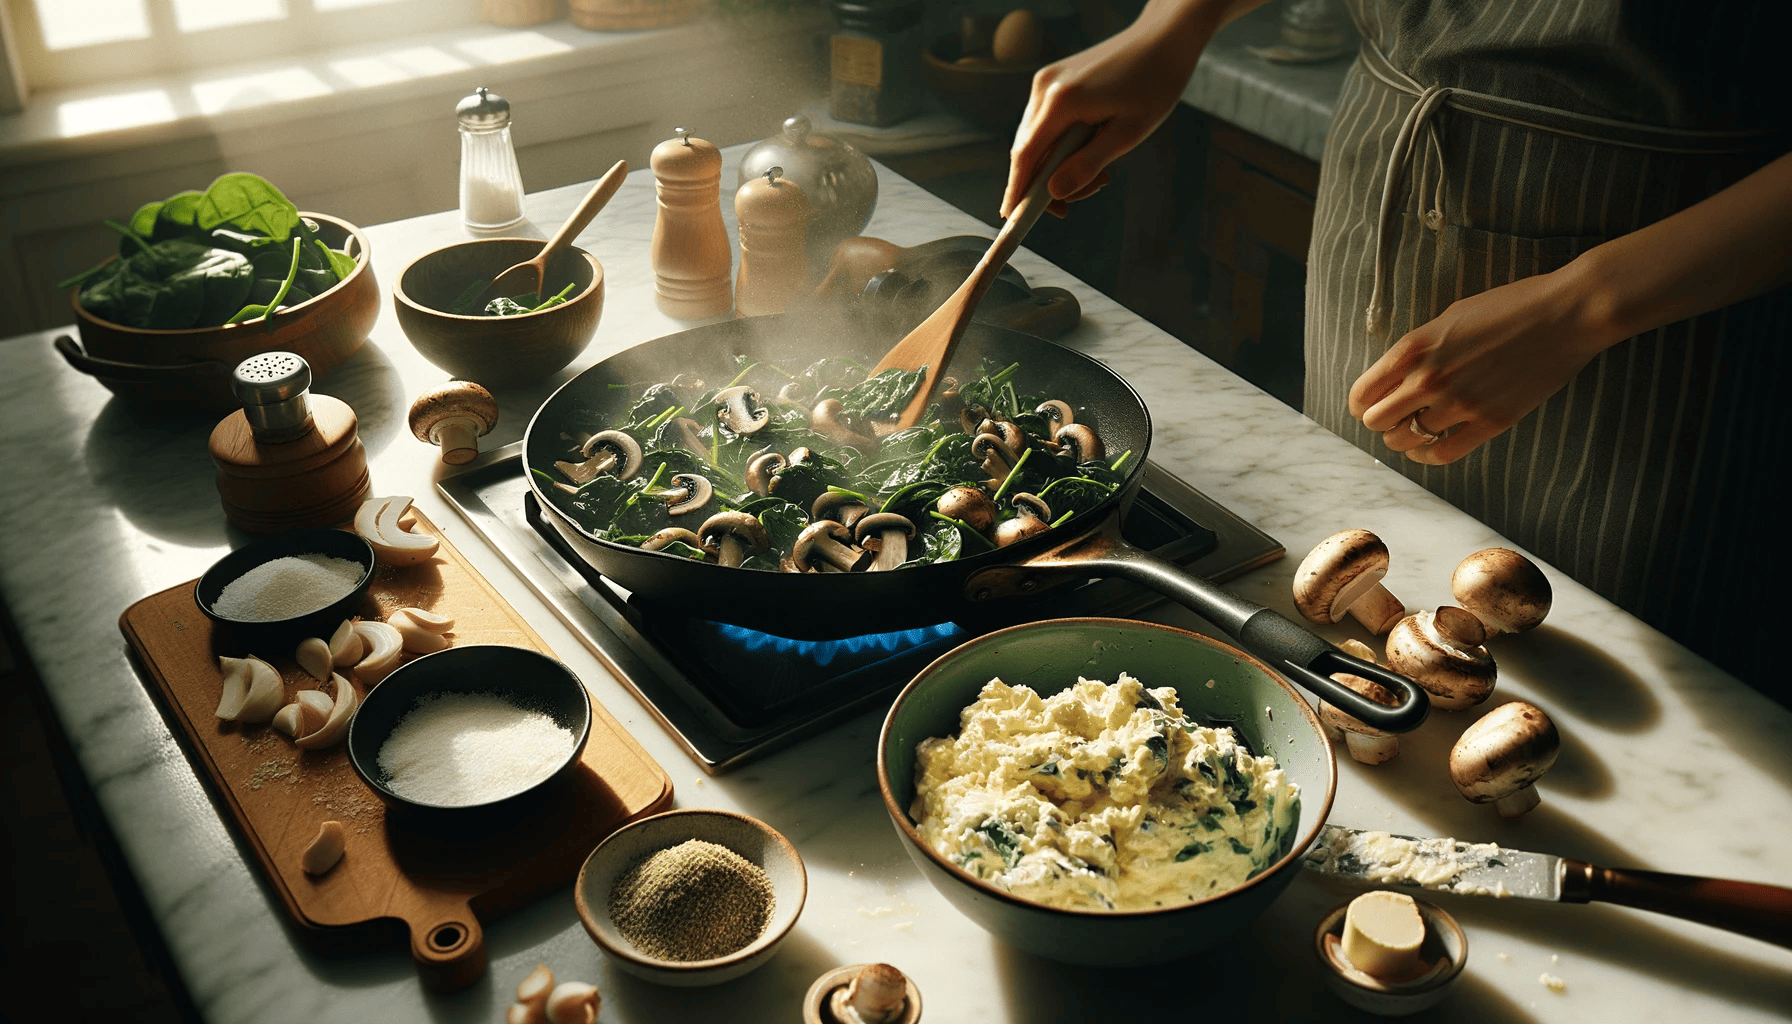 Mid-cooking scene, with the mushrooms being cooked in a pan